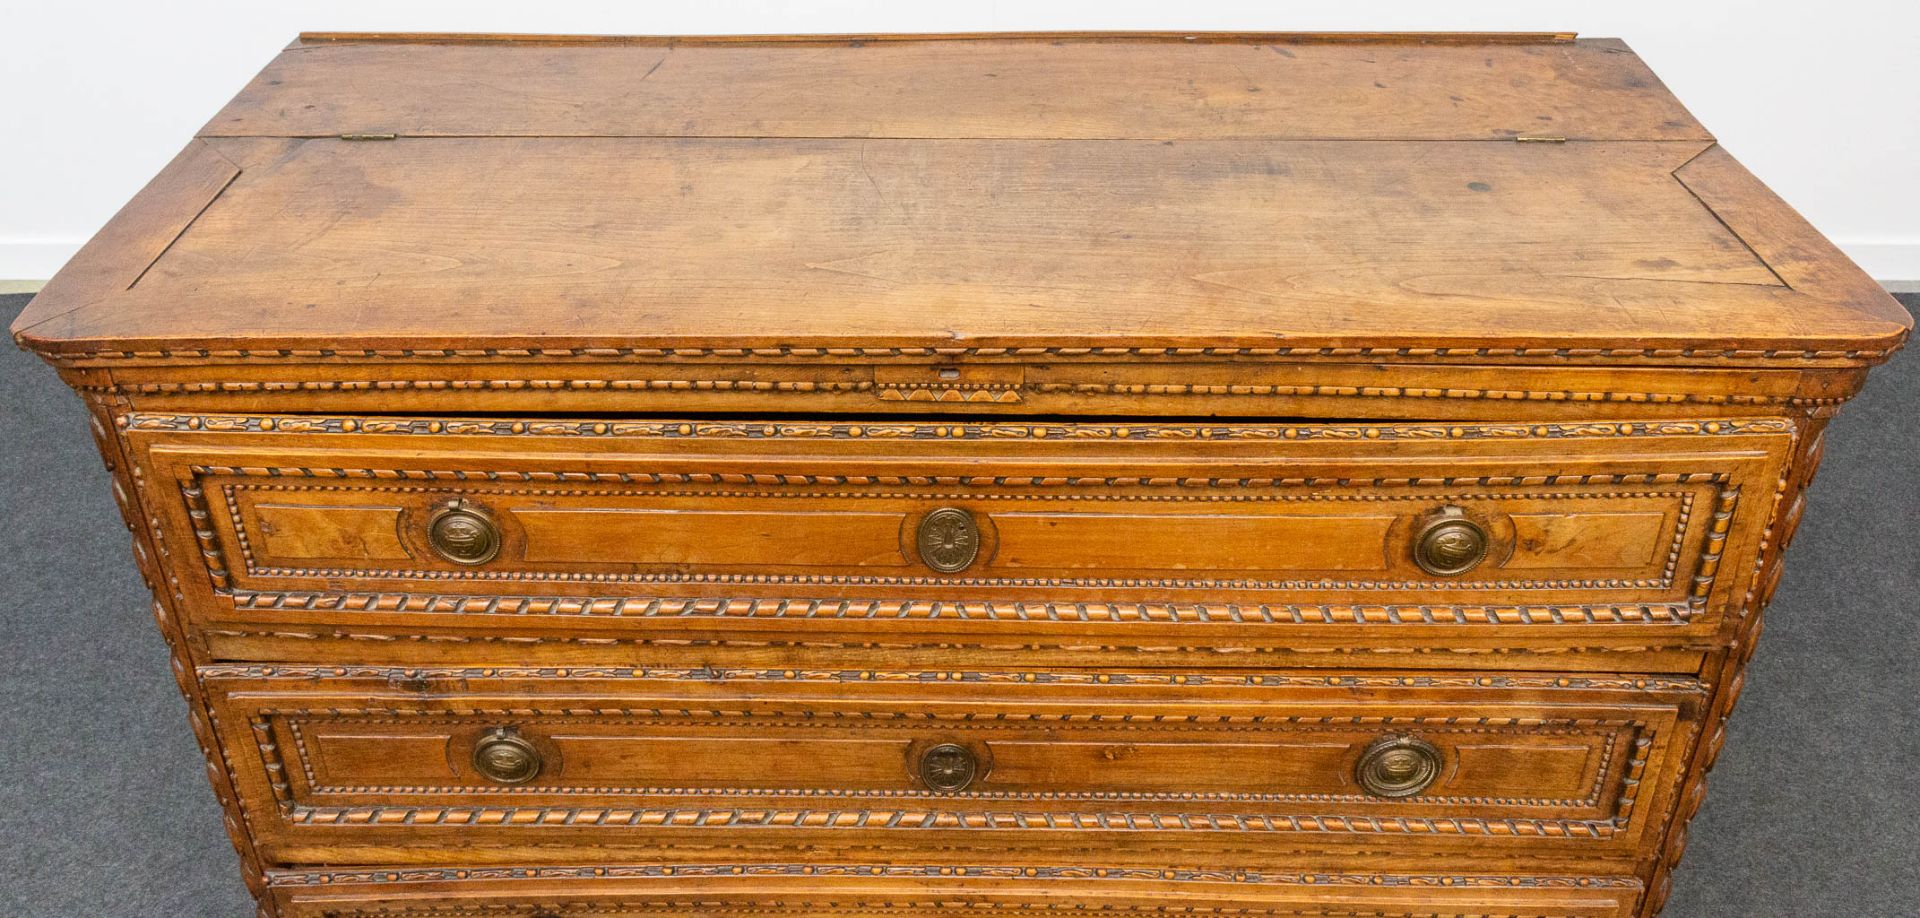 A wood sculptured commode in Louis XVI style, with 3 drawers and a hidden desk. 18th century. - Image 21 of 23